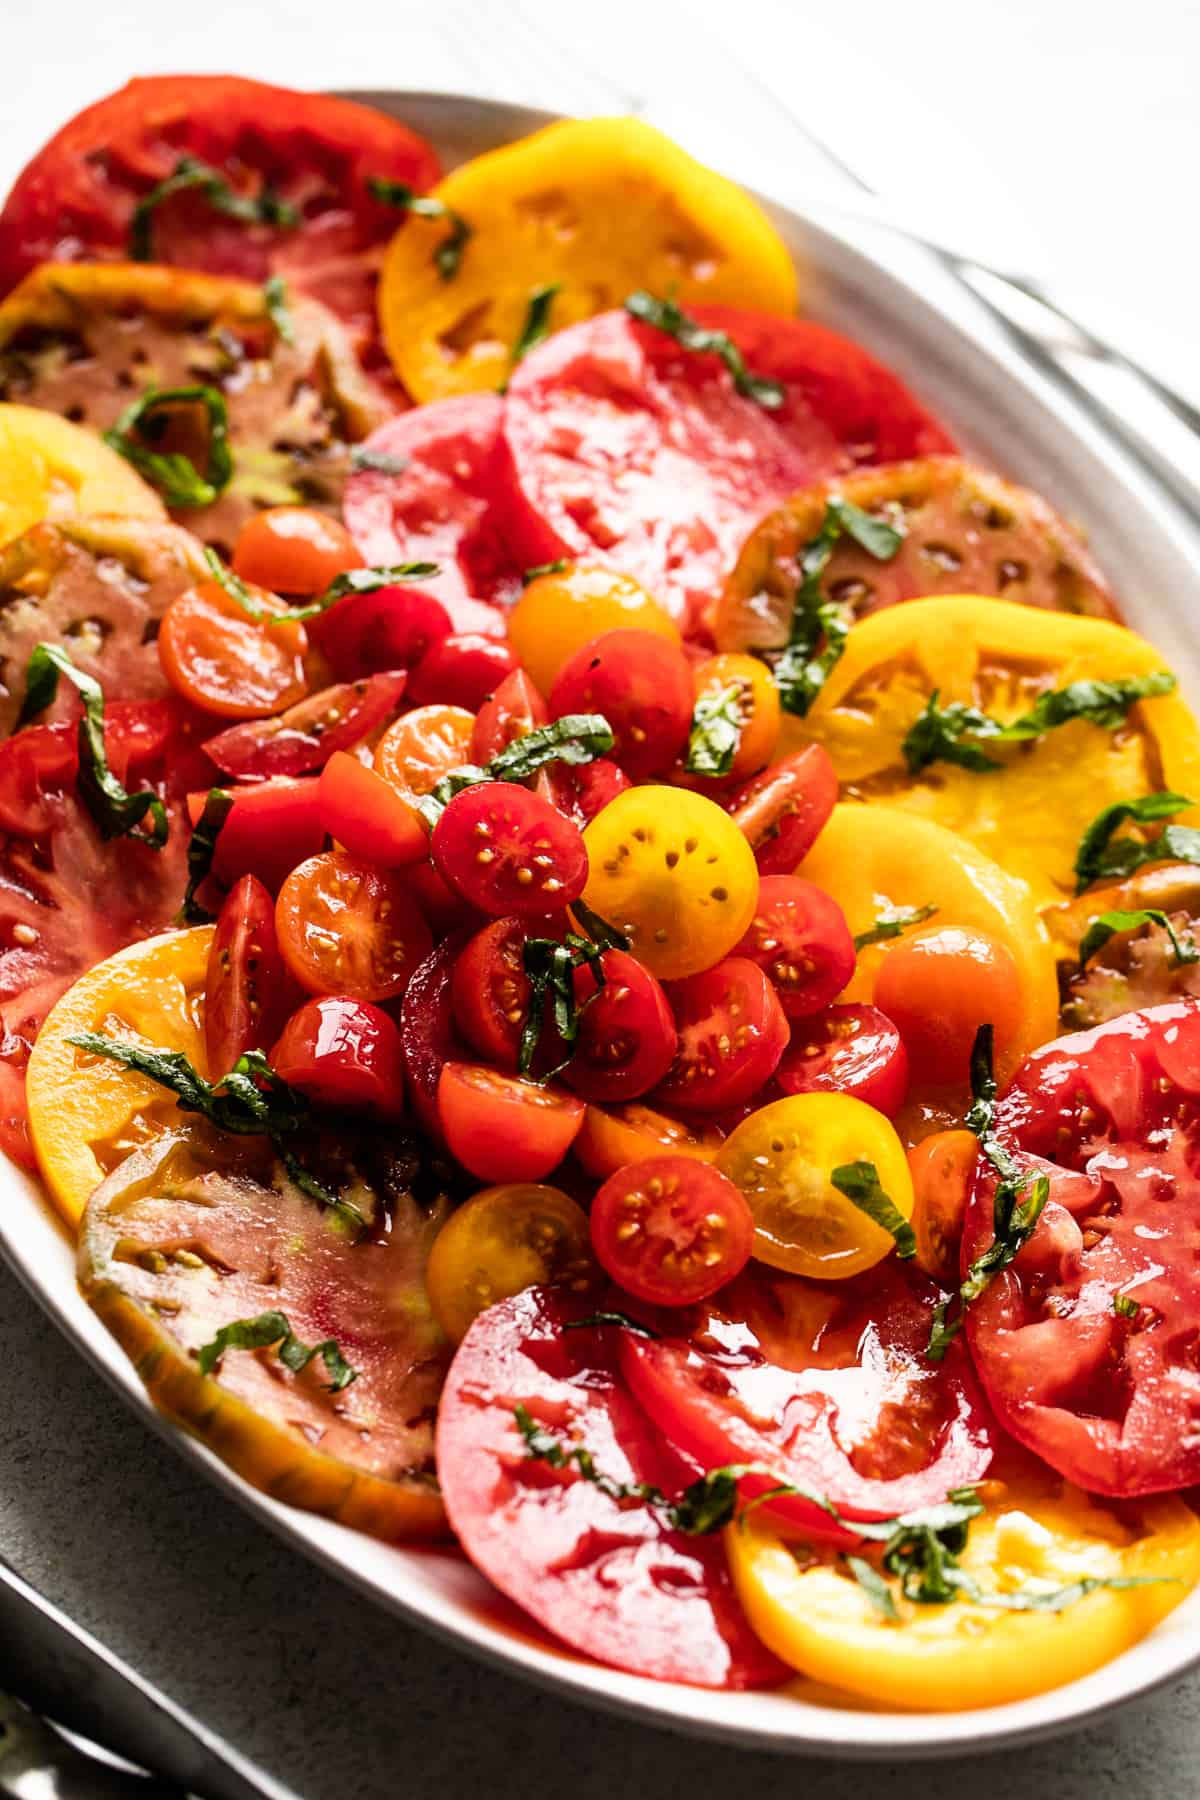 slices of heirloom tomatoes arranged on an oval platter, with halved cherry tomatoes placed in the center, and a garnish of basil over the entire salad.